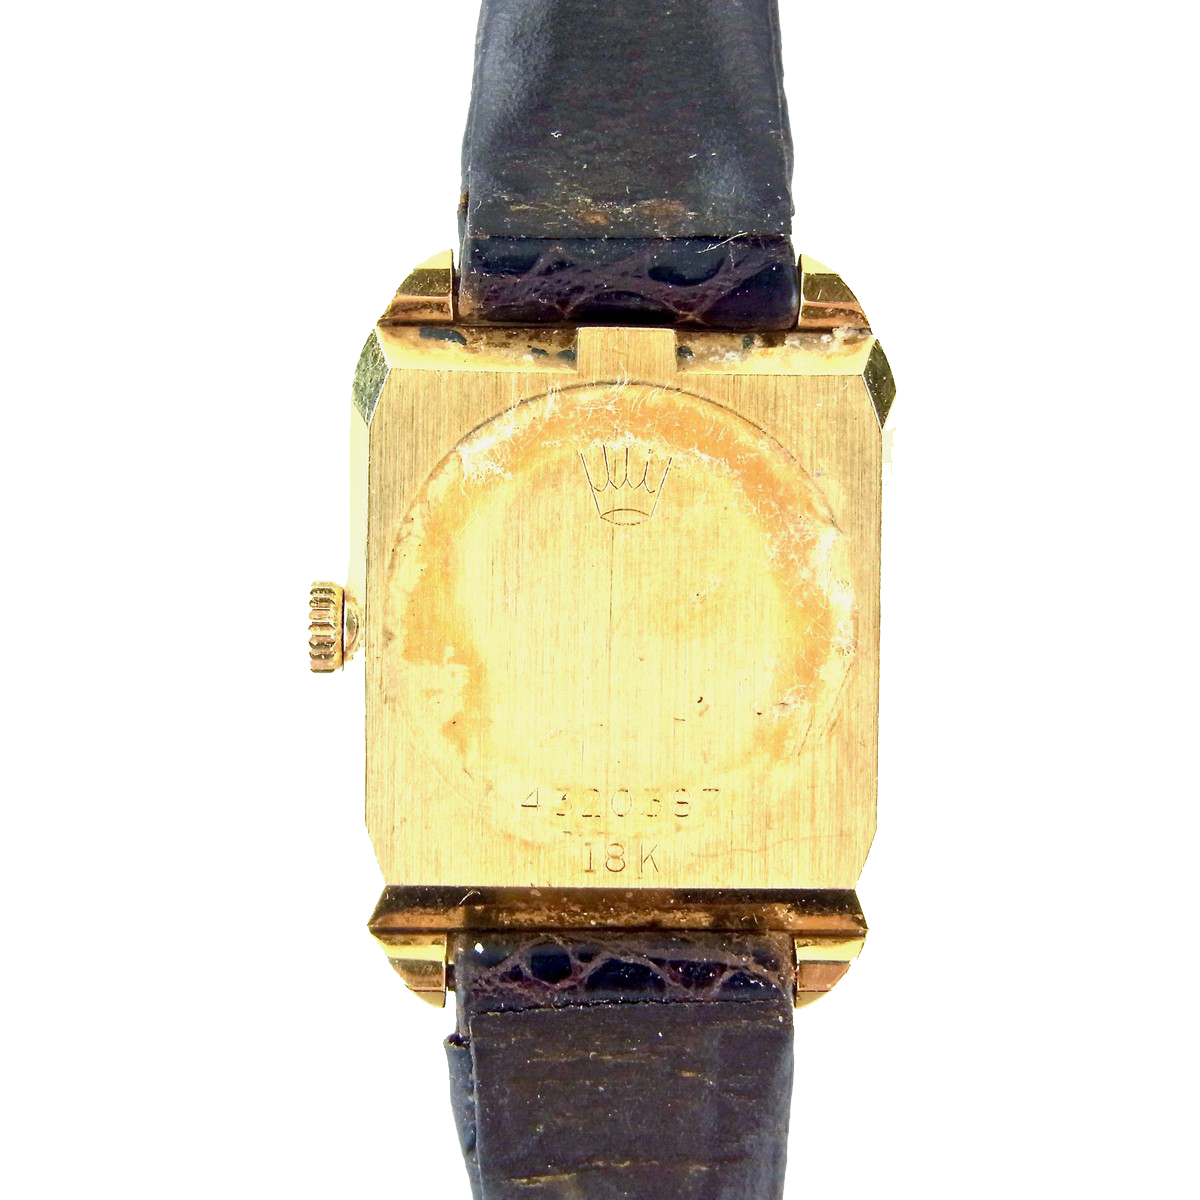 Rolex Cellini 18 ct yellow gold watch. Year 1976. - Image 2 of 3